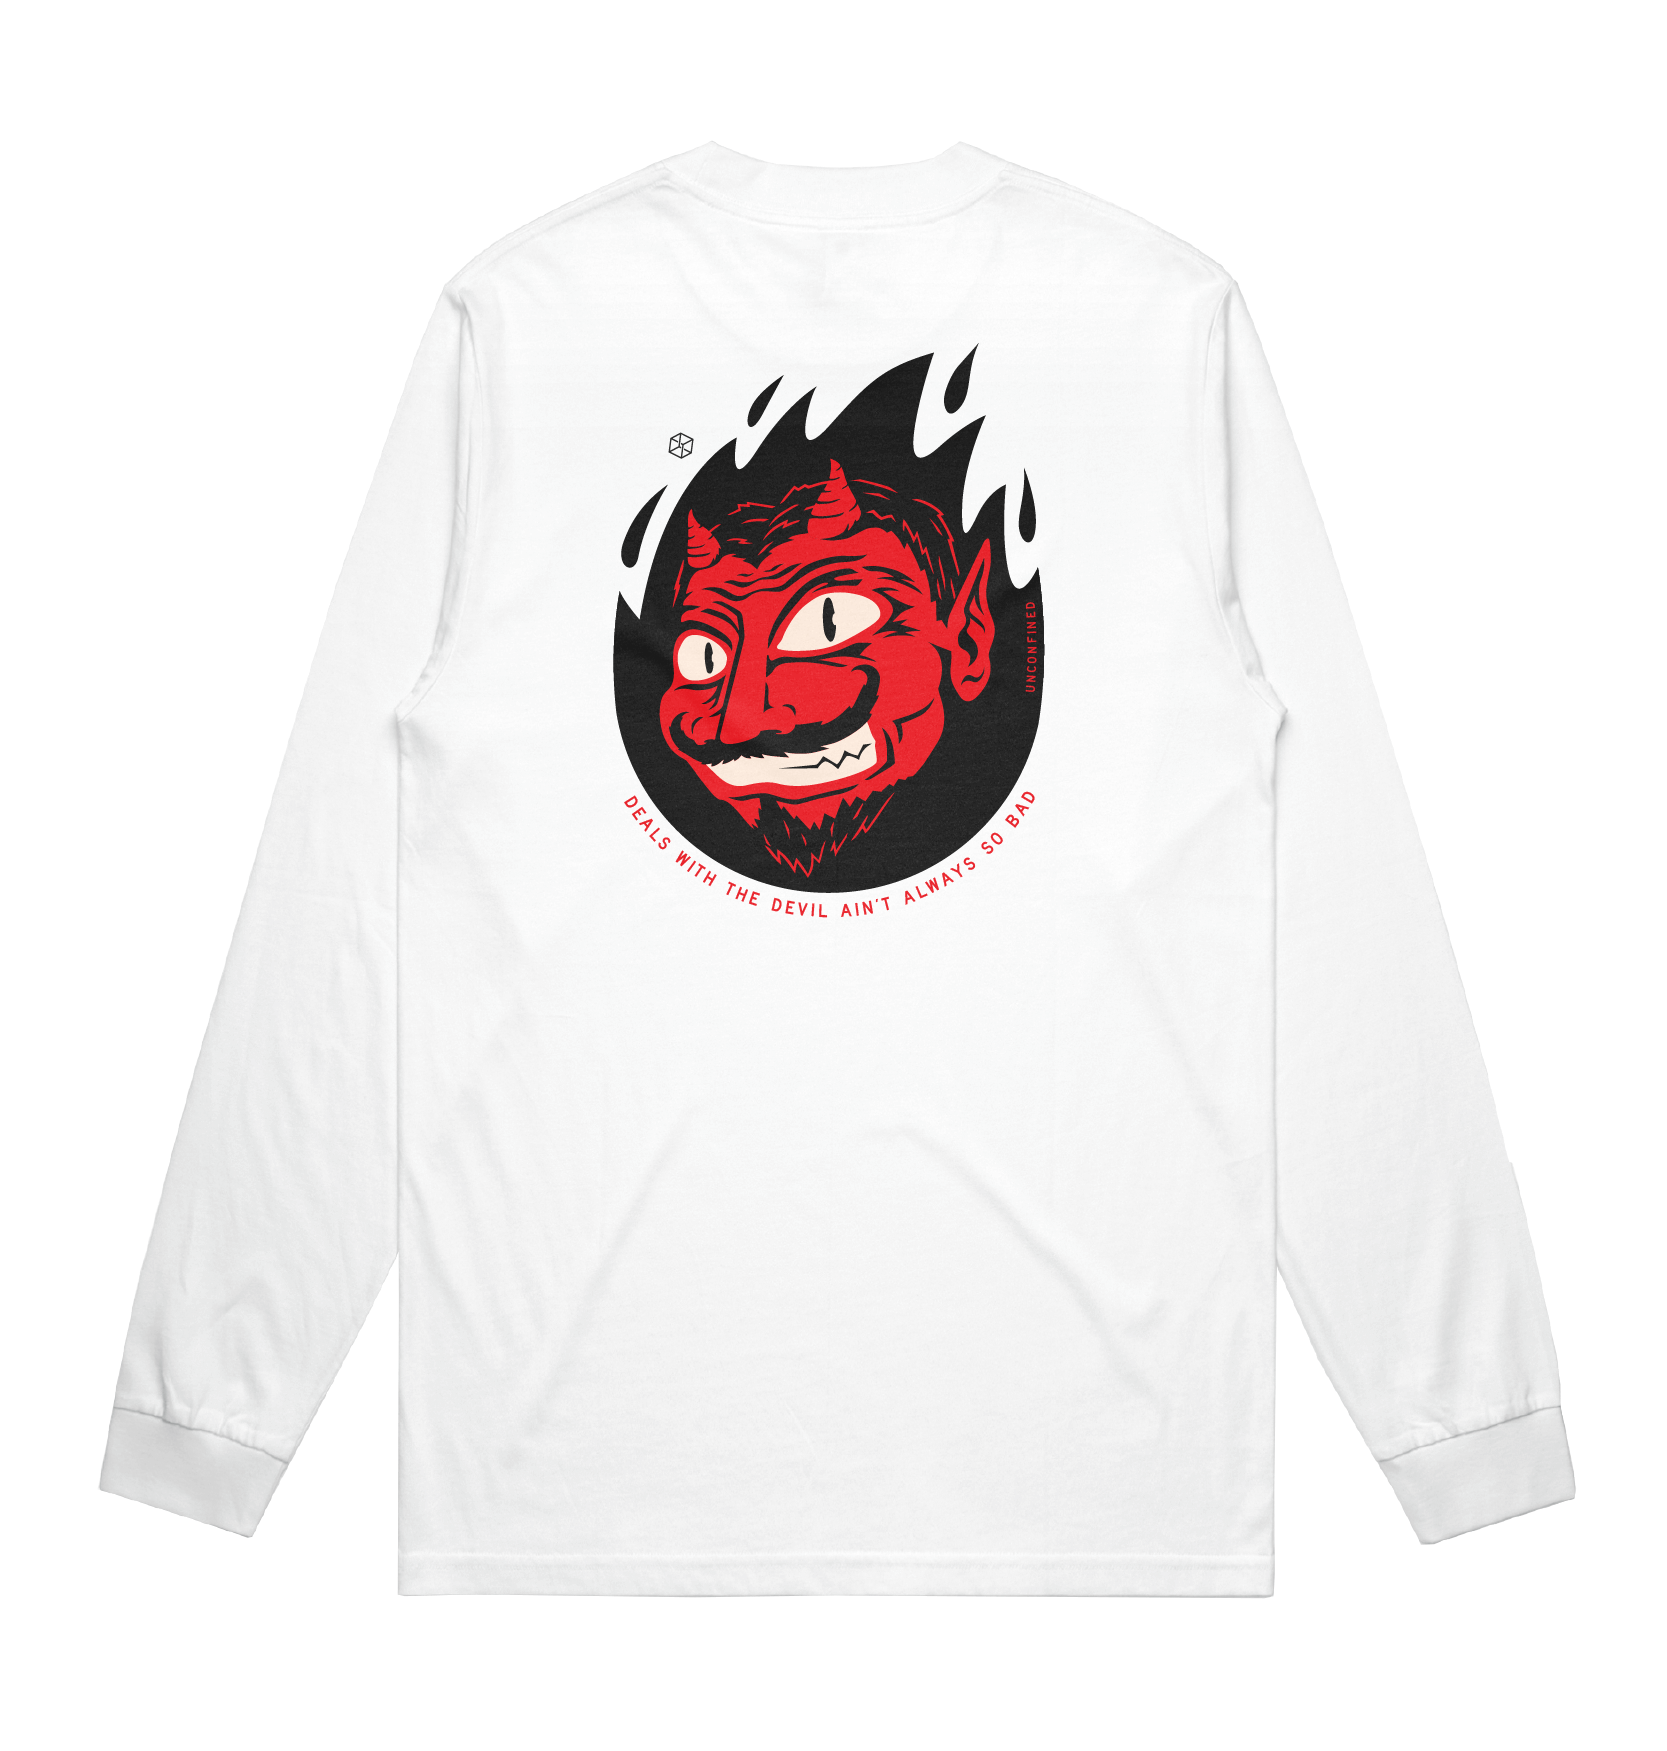 Deals with the Devil Graphic Long Sleeve T-Shirt